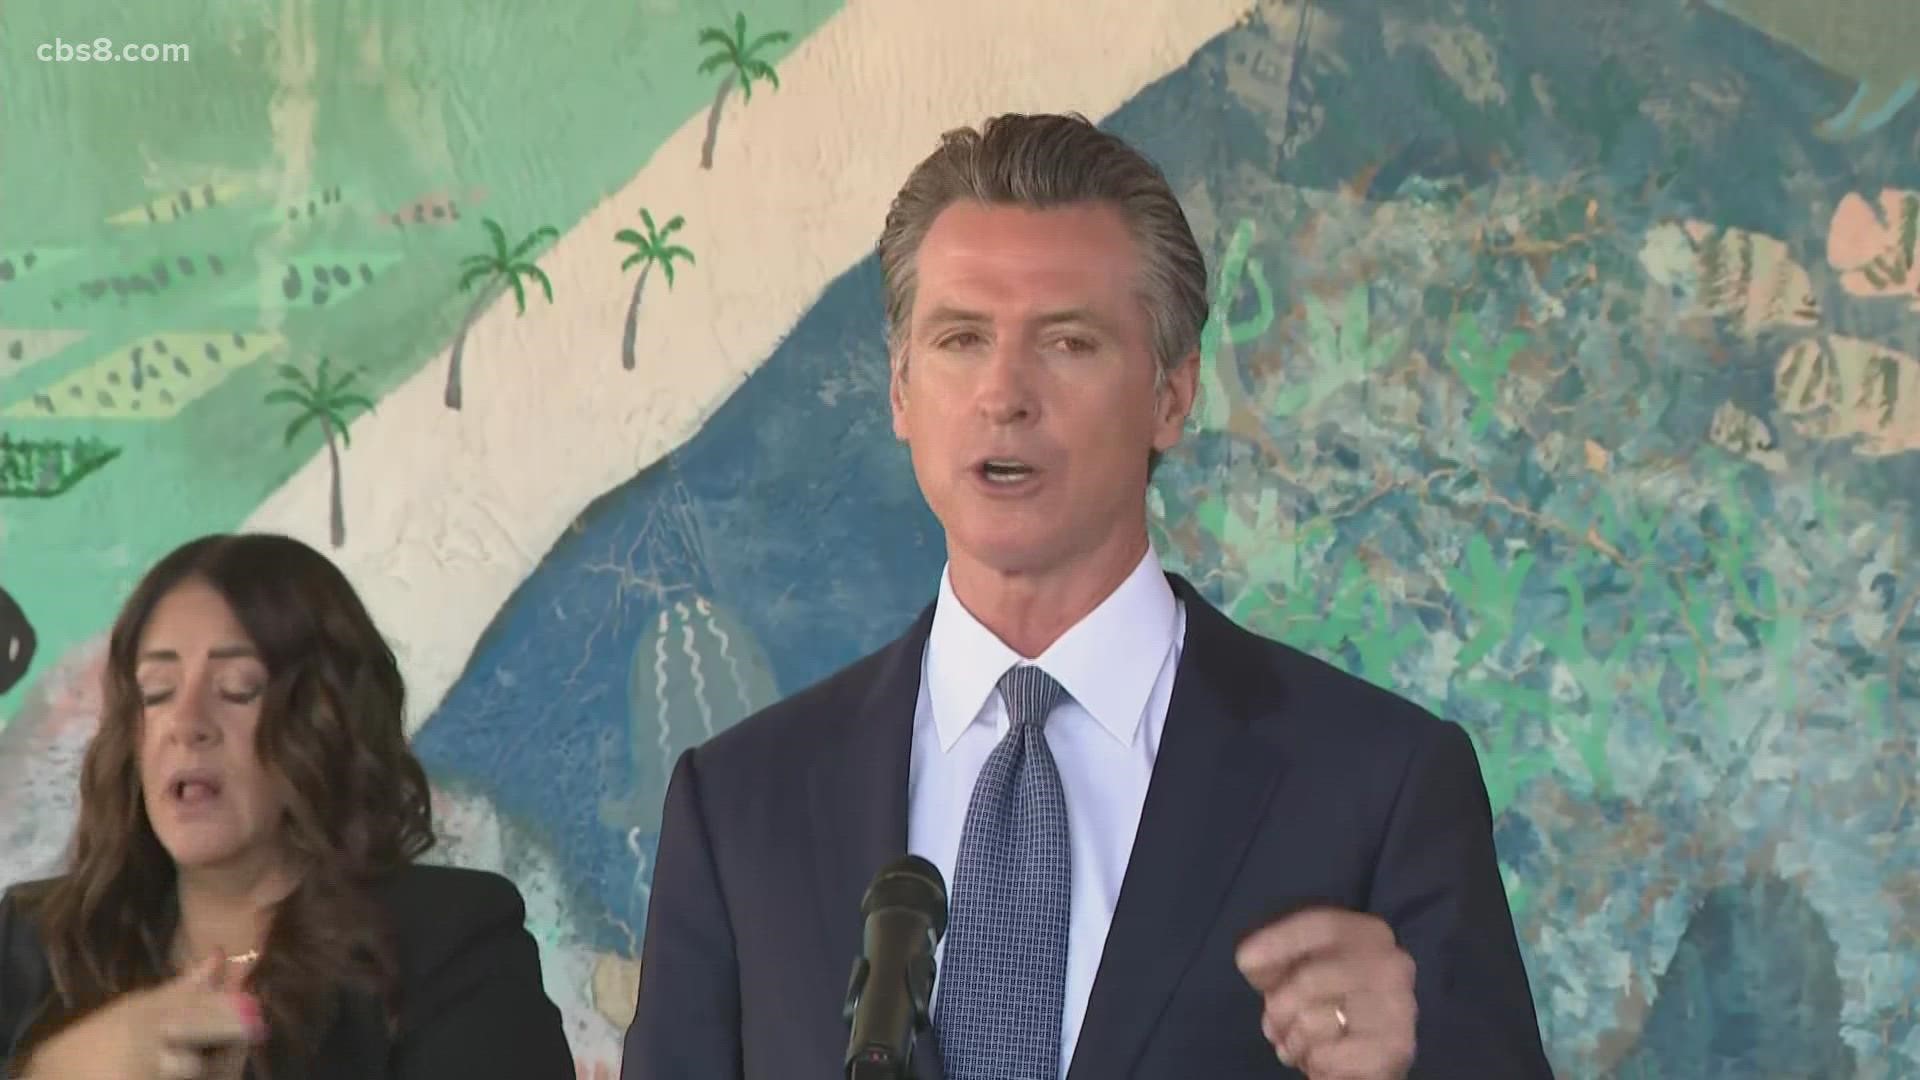 Newsom is expected to announce Wednesday that teachers and other school employees must get vaccinated or go through regular COVID testing.